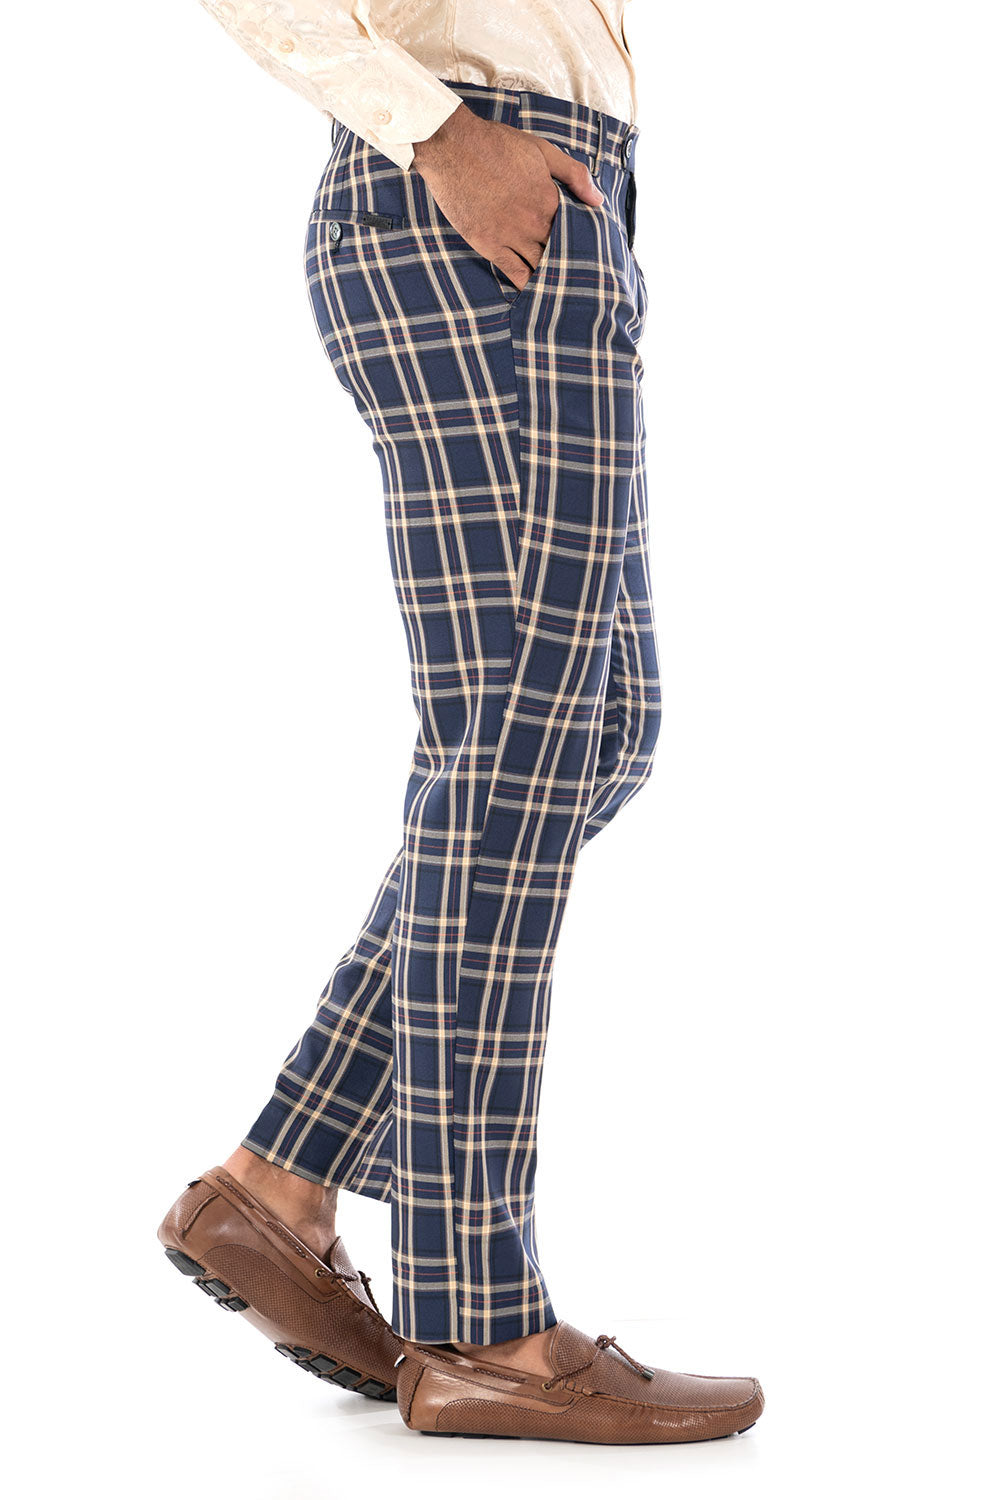 BARABAS men's checkered plaid navy and beige chino pants CP61 